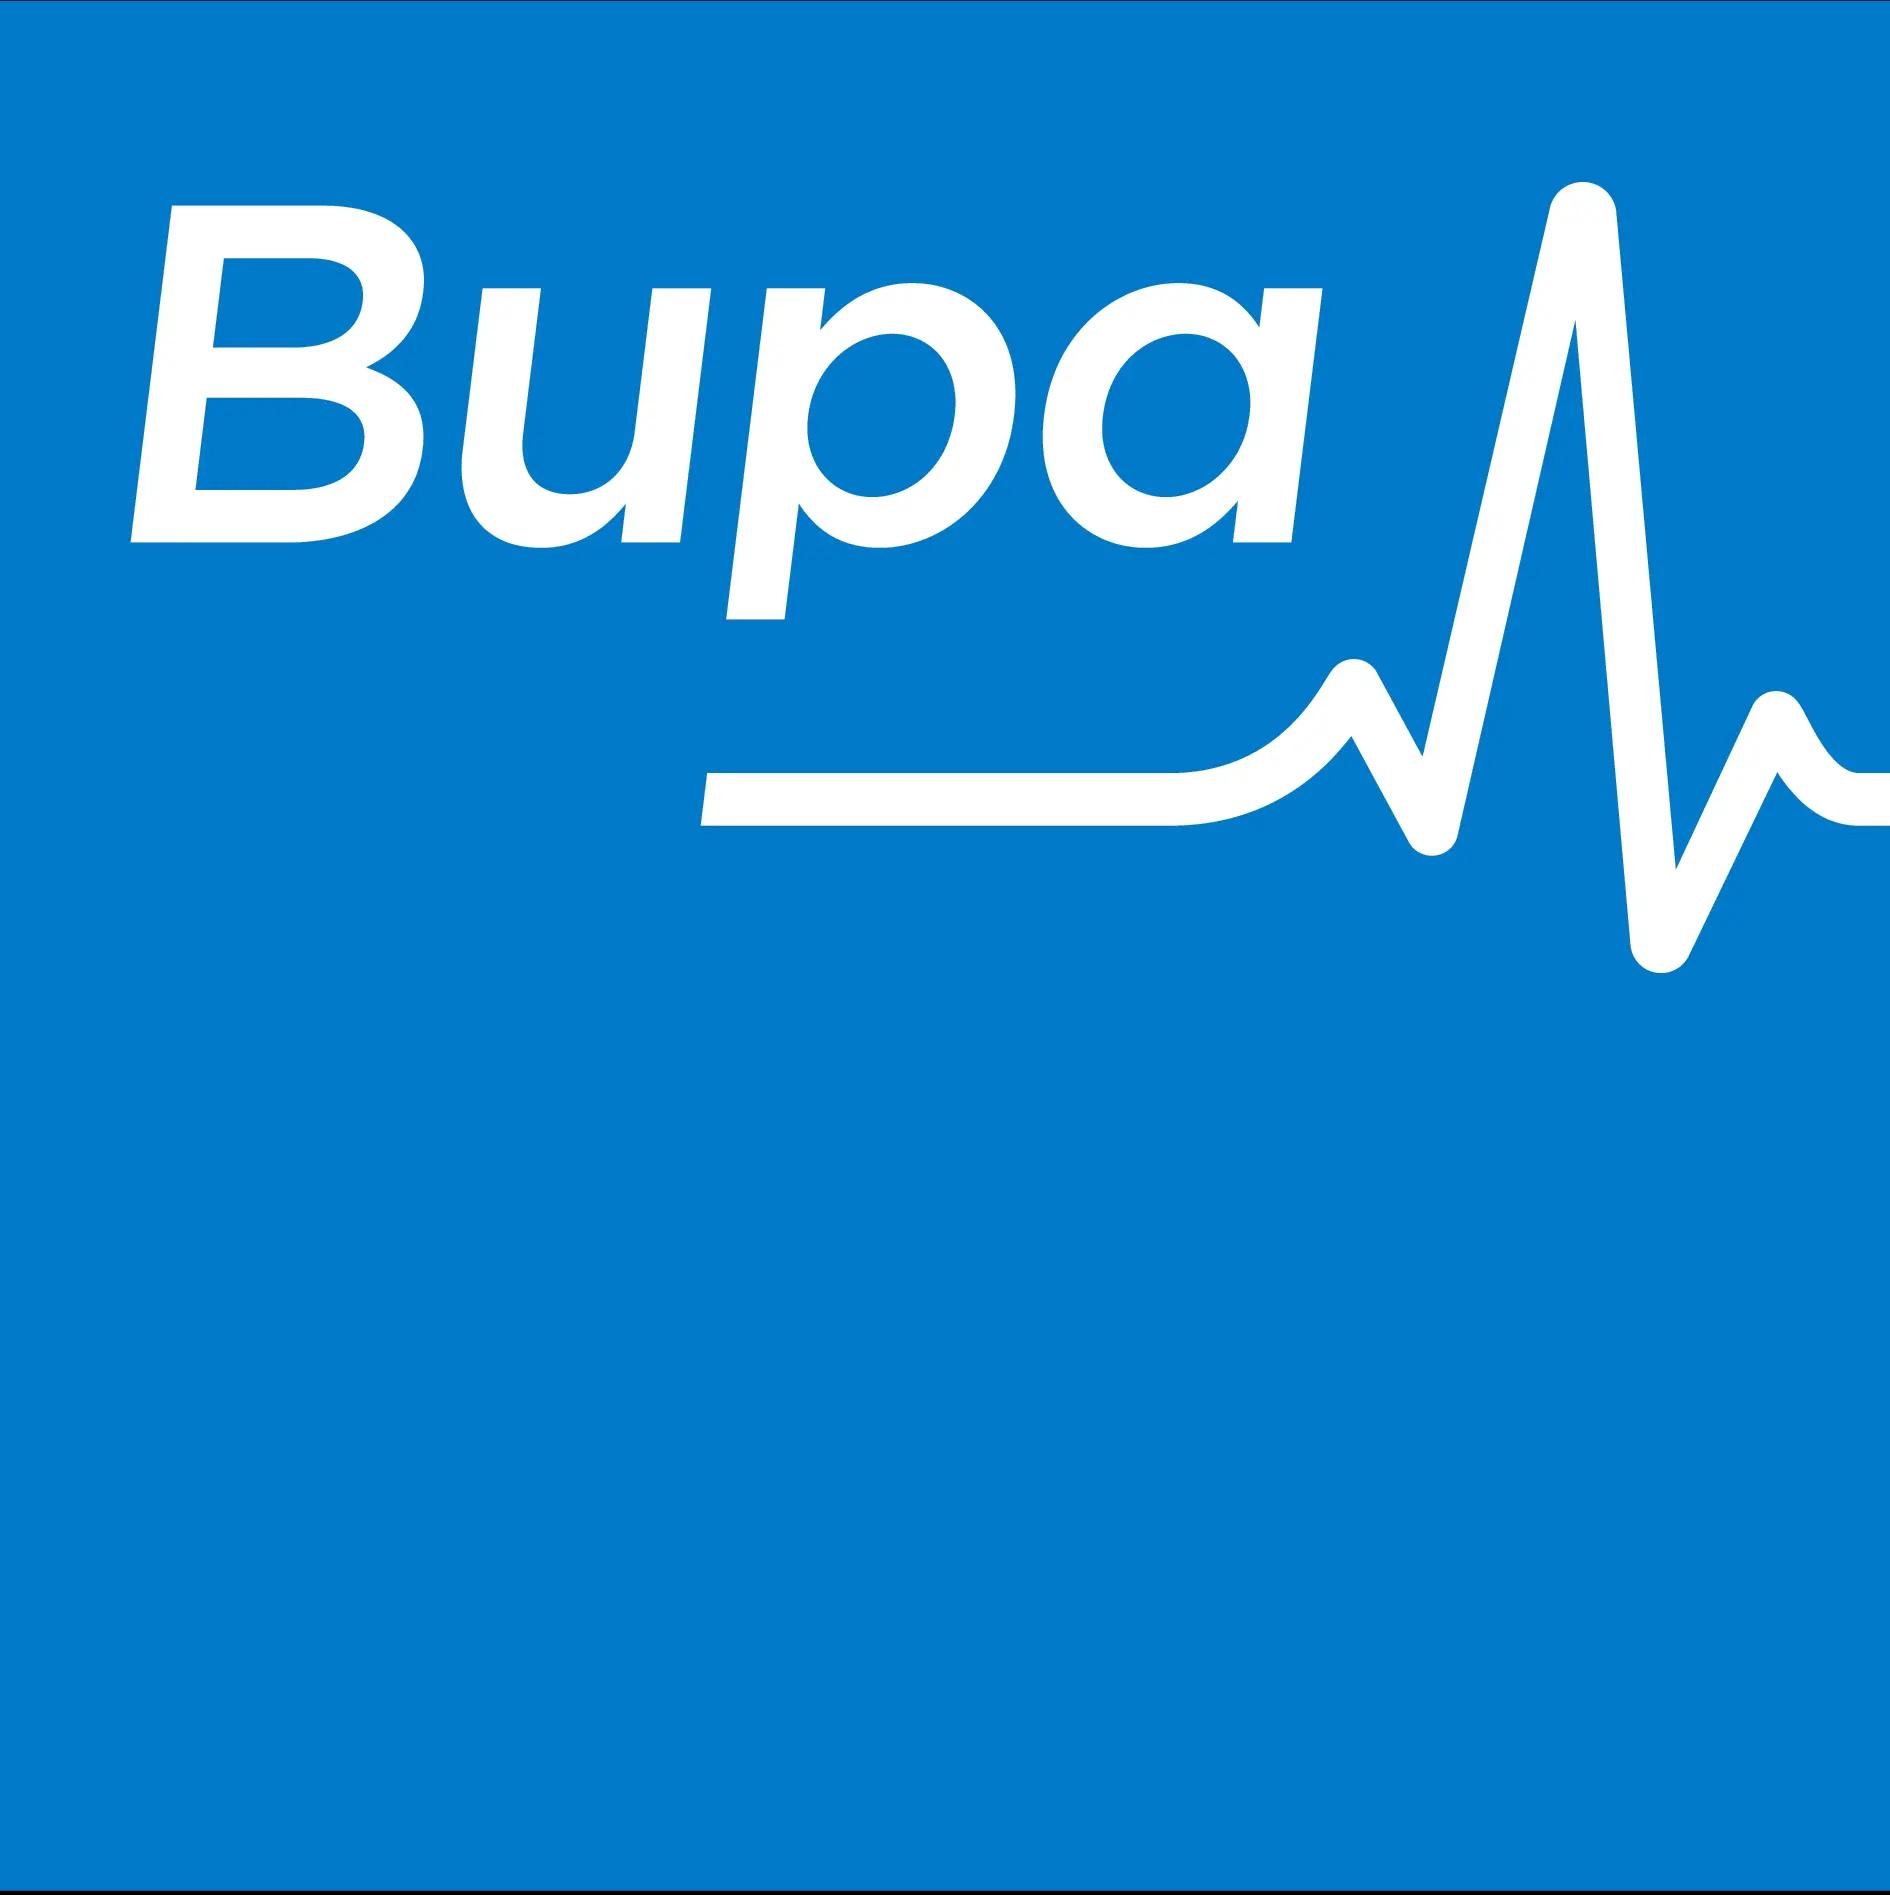 The icon for Bupa